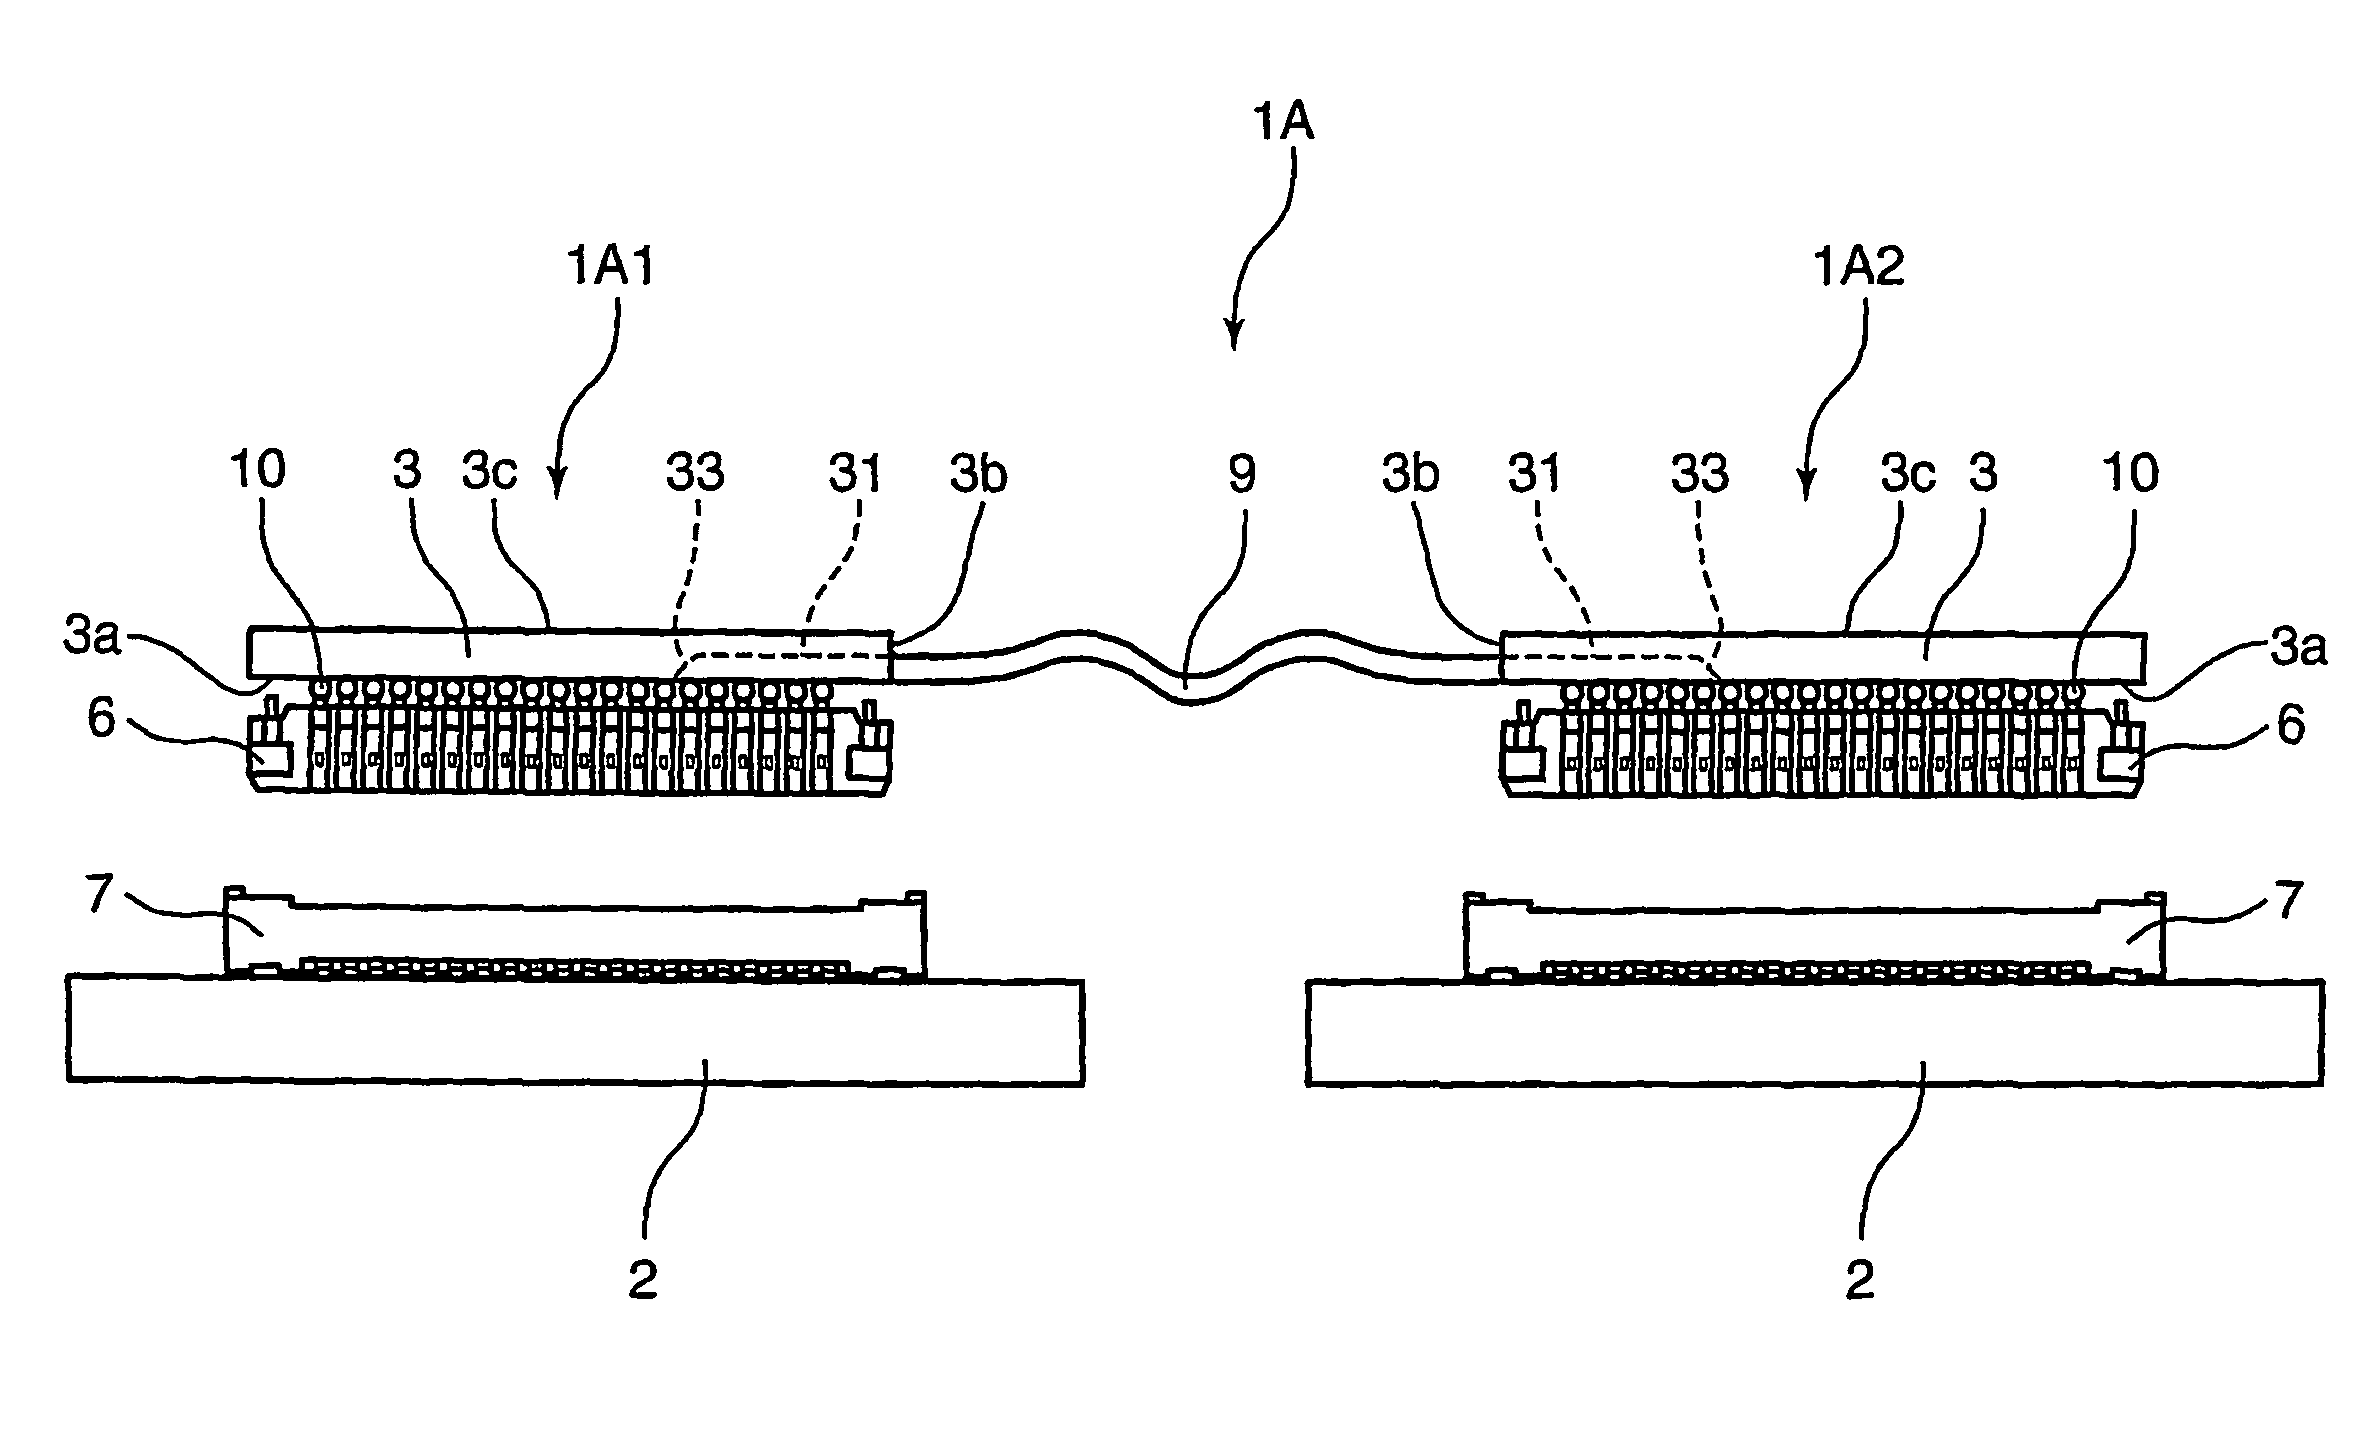 Photoelectric converter providing a waveguide along the surface of the mount substrate